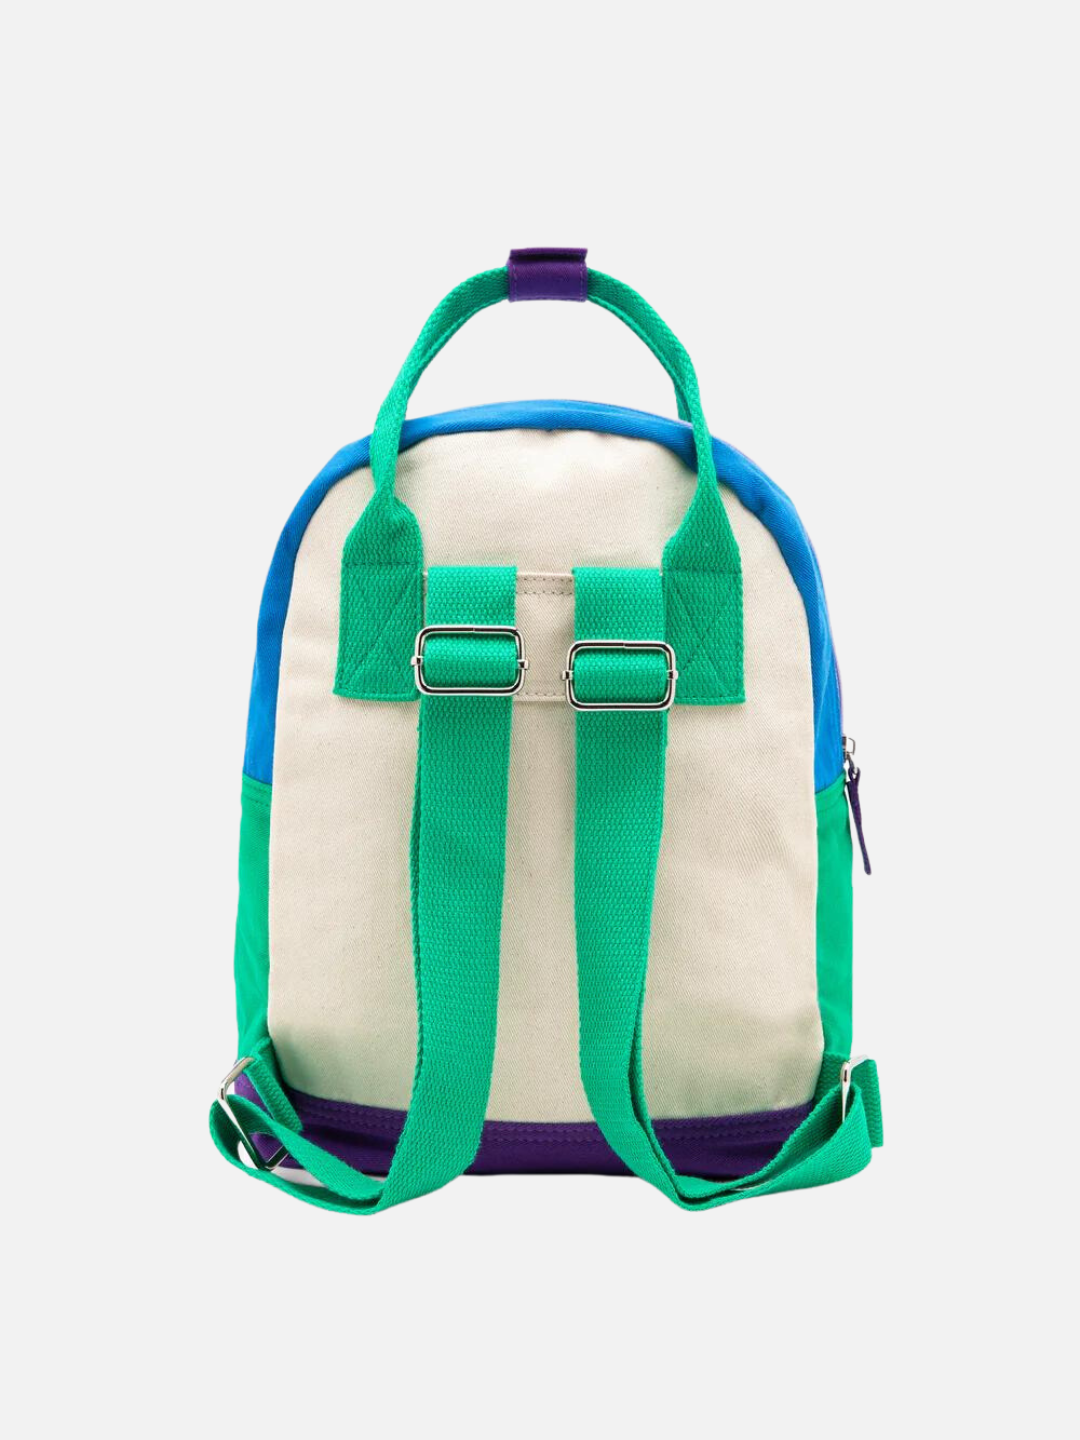 Rear view of a colorblock backpack with green handles and straps, purple base, blue top and a cream backing